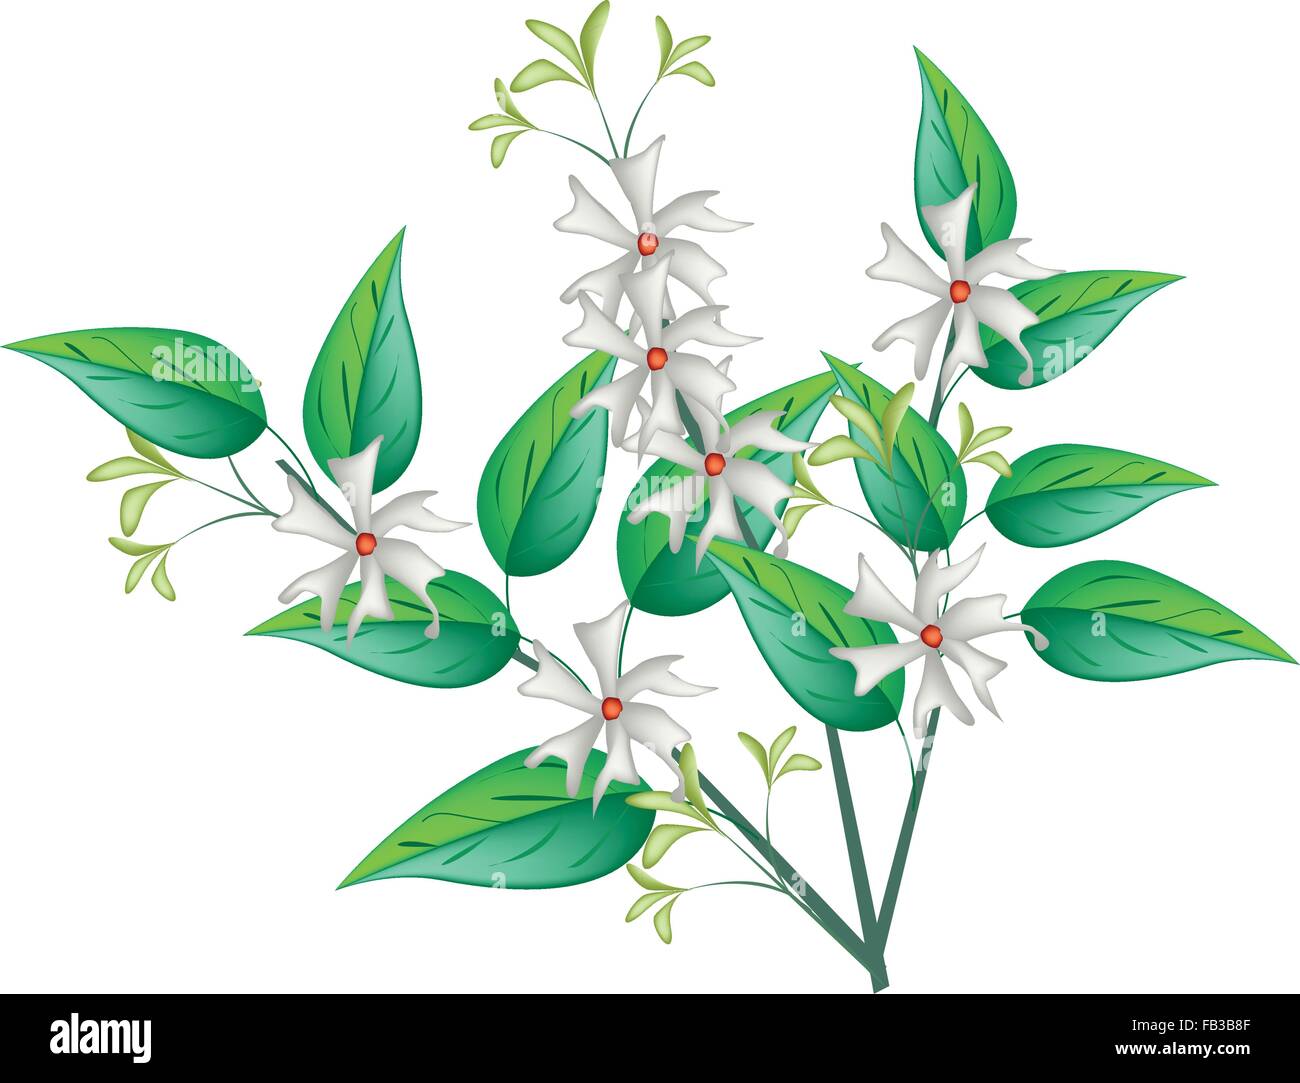 Beautiful Flower, Bunch of White Tuberose Flowers or Night Blooming Jasmine with Green Leaves Isolated on White Background. Stock Vector